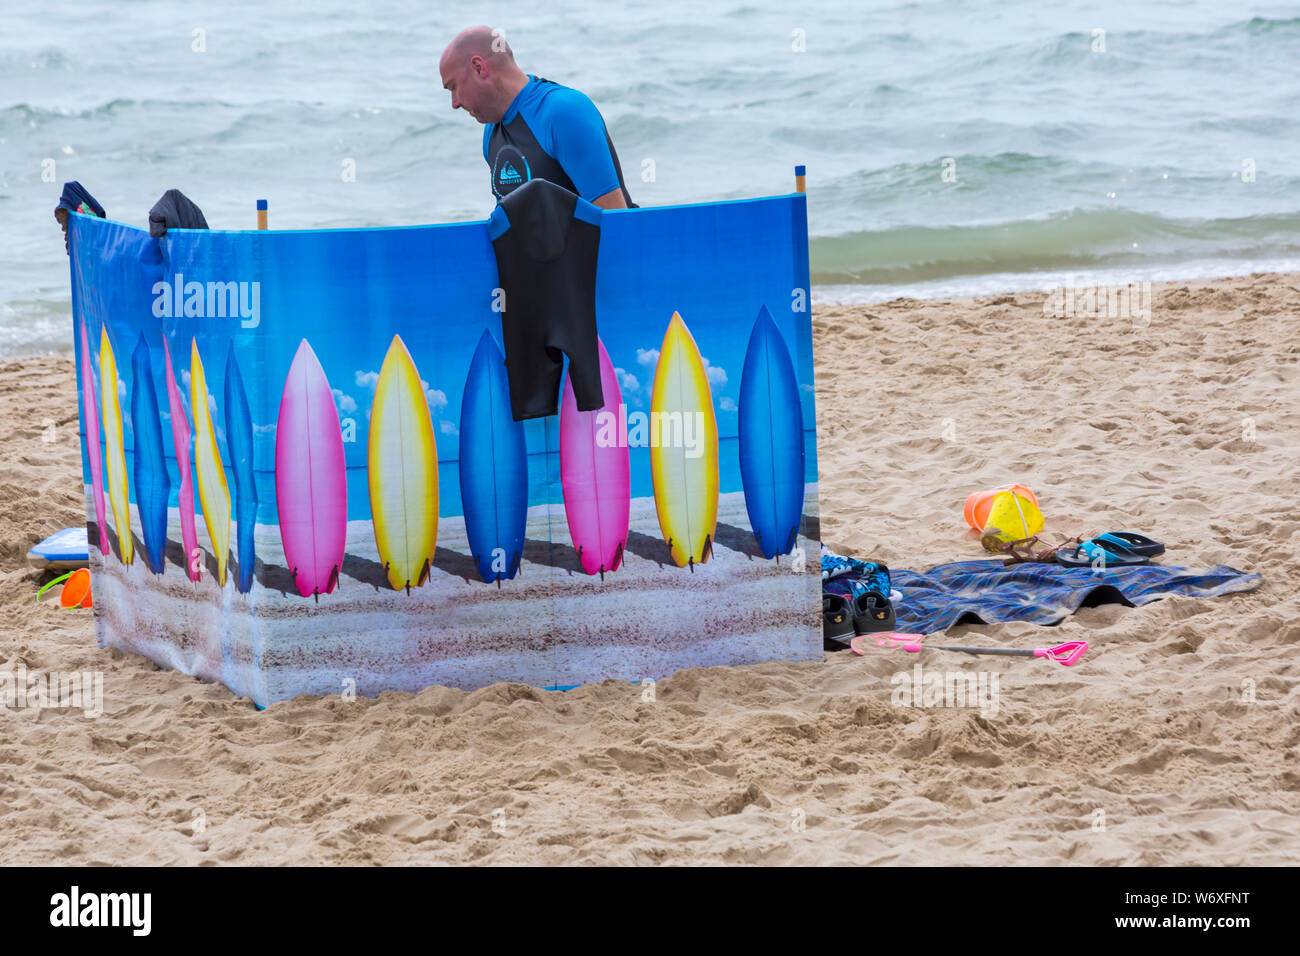 Bournemouth, Dorset UK. 3rd Aug 2019. UK weather: overcast and cloudy, but warm and muggy. Beach goers head to the beaches at Bournemouth to enjoy the warm weather. Man behind windbreak wind break. Credit: Carolyn Jenkins/Alamy Live News Stock Photo